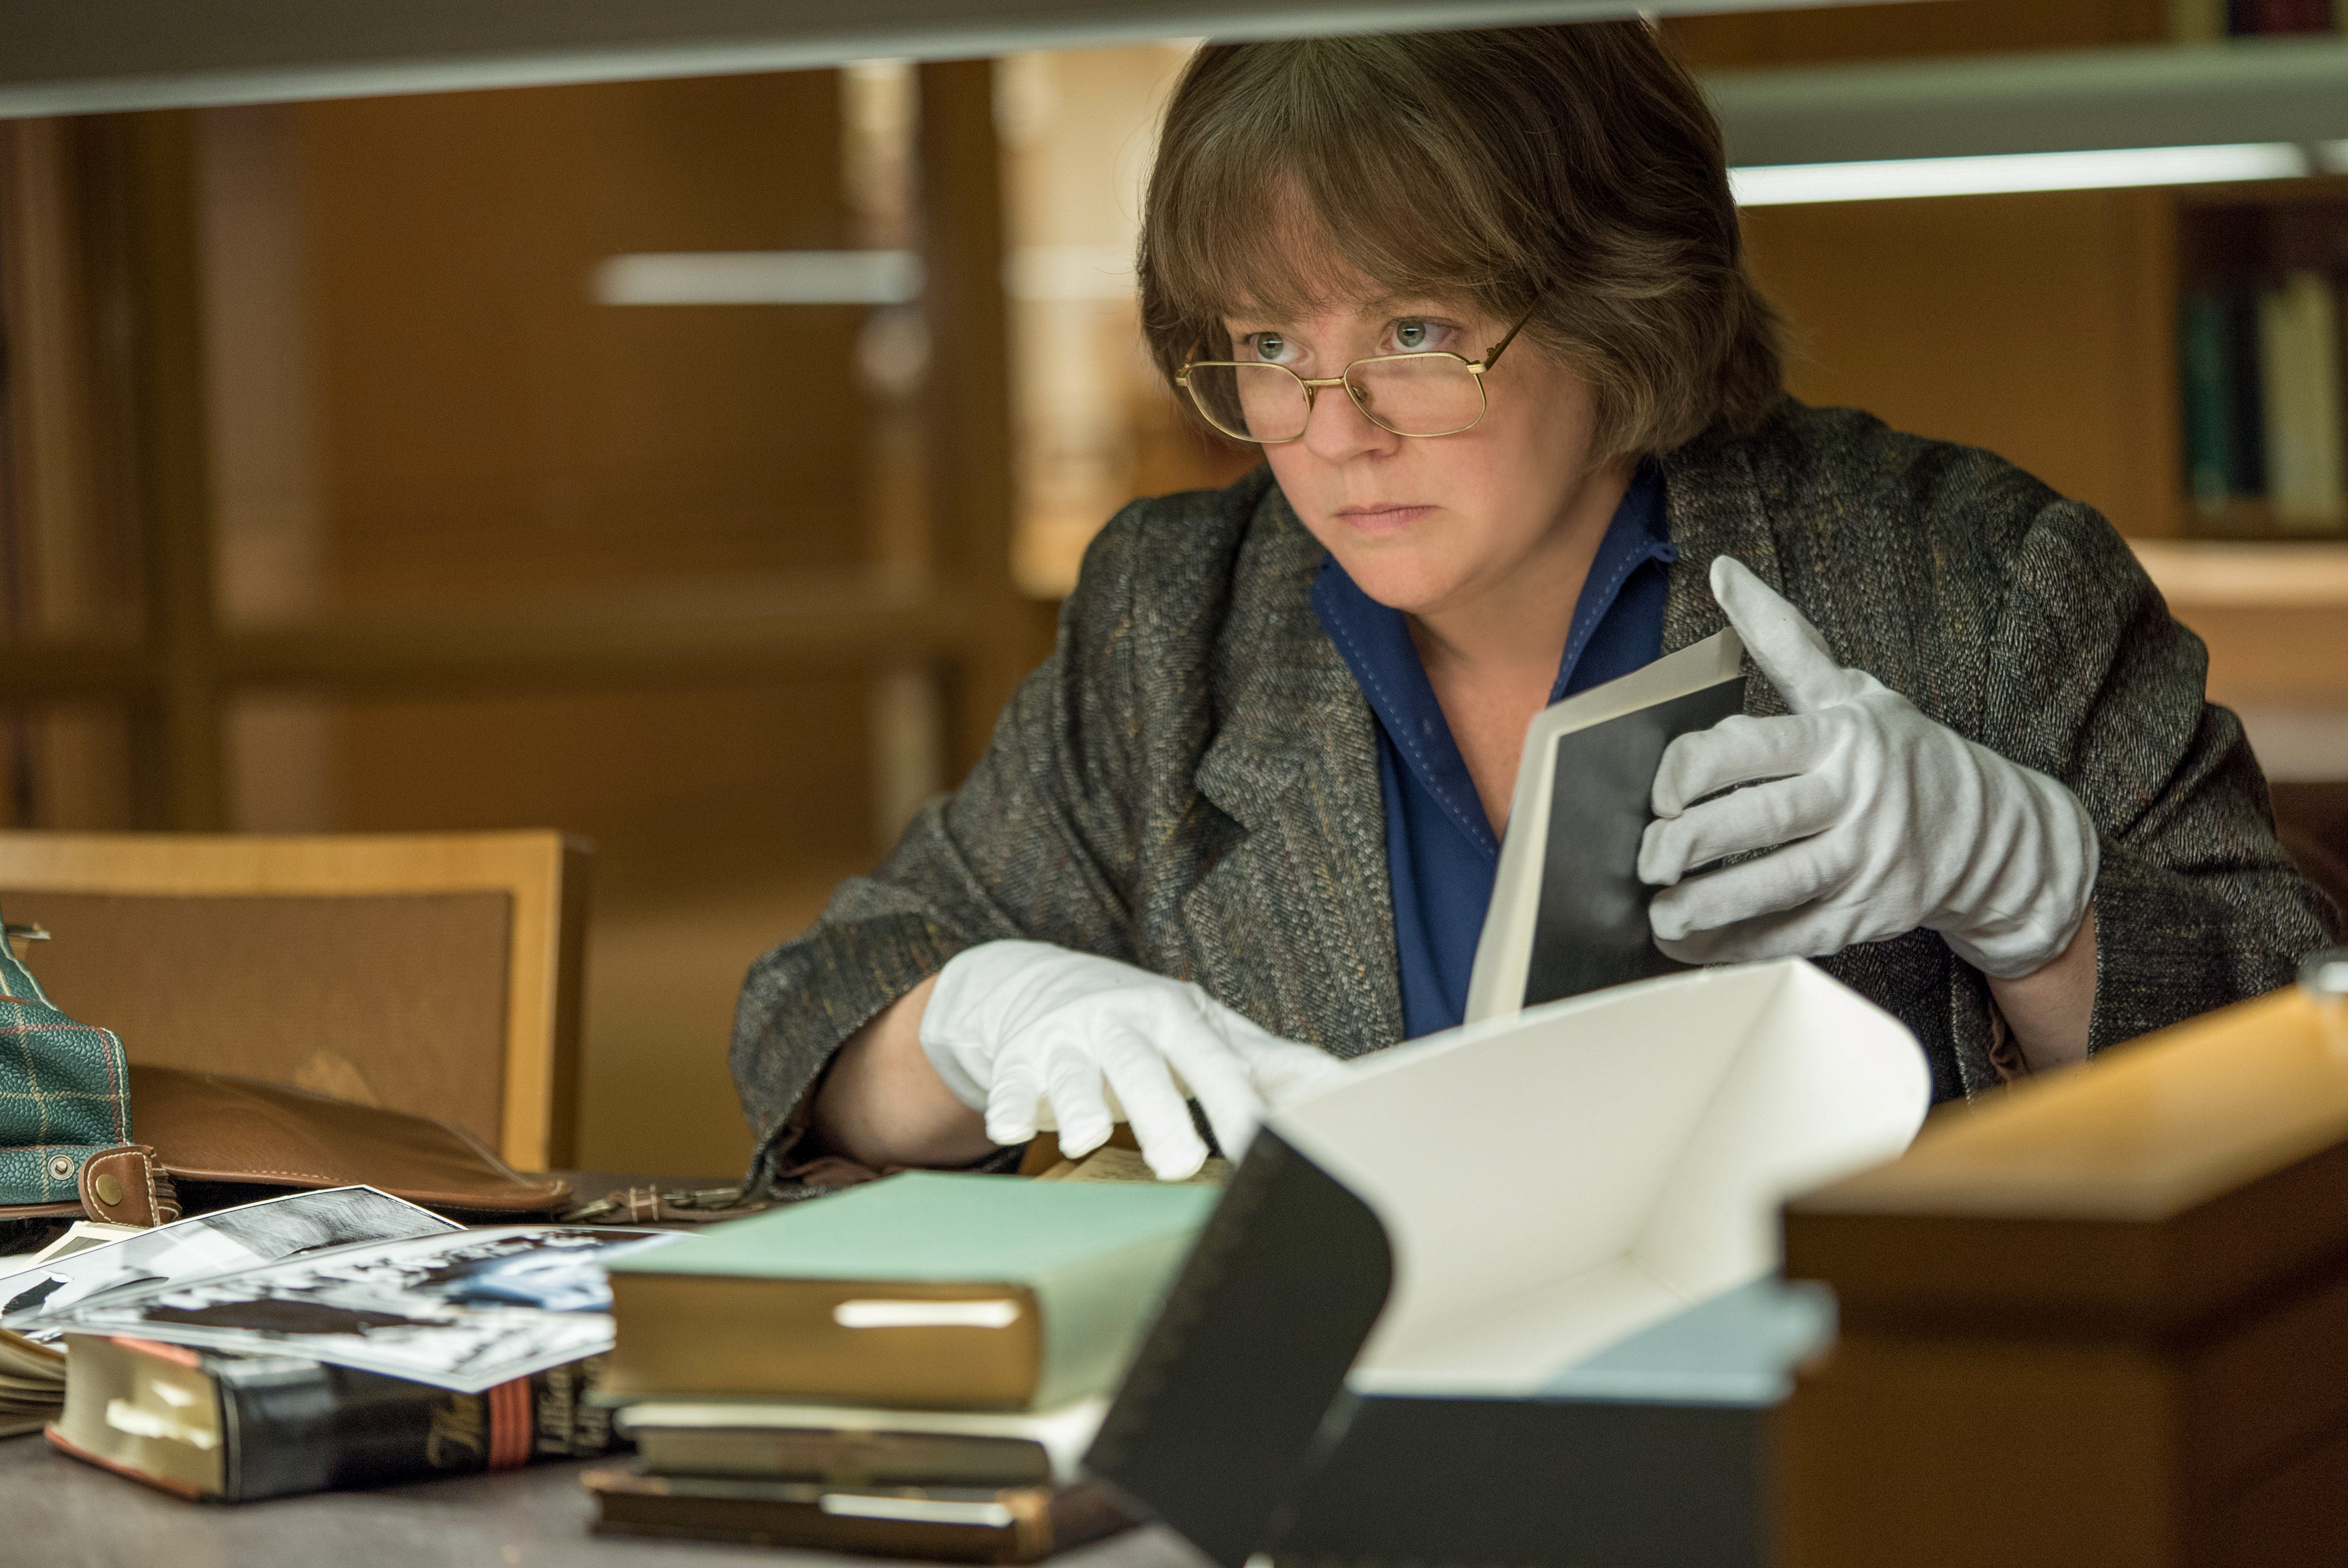 McCarthy Impresses in ‘Can You Ever Forgive Me?’